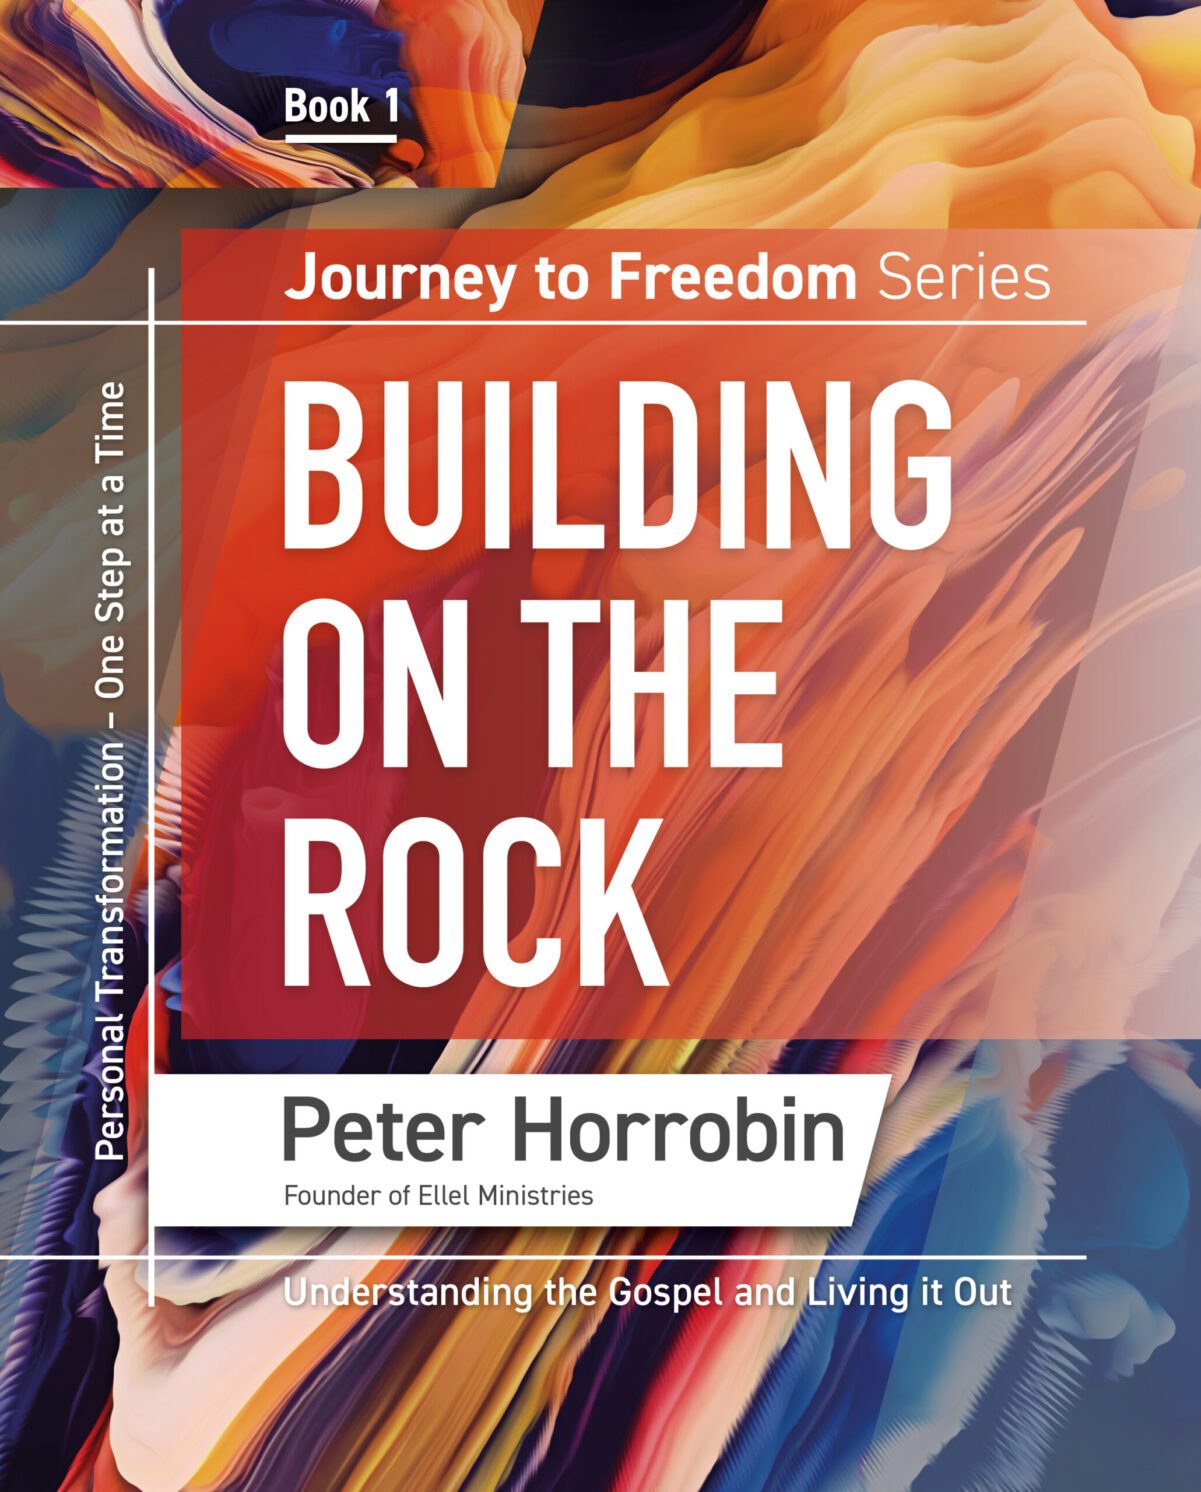 Journey to Freedom Book 1 – Building on the Rock